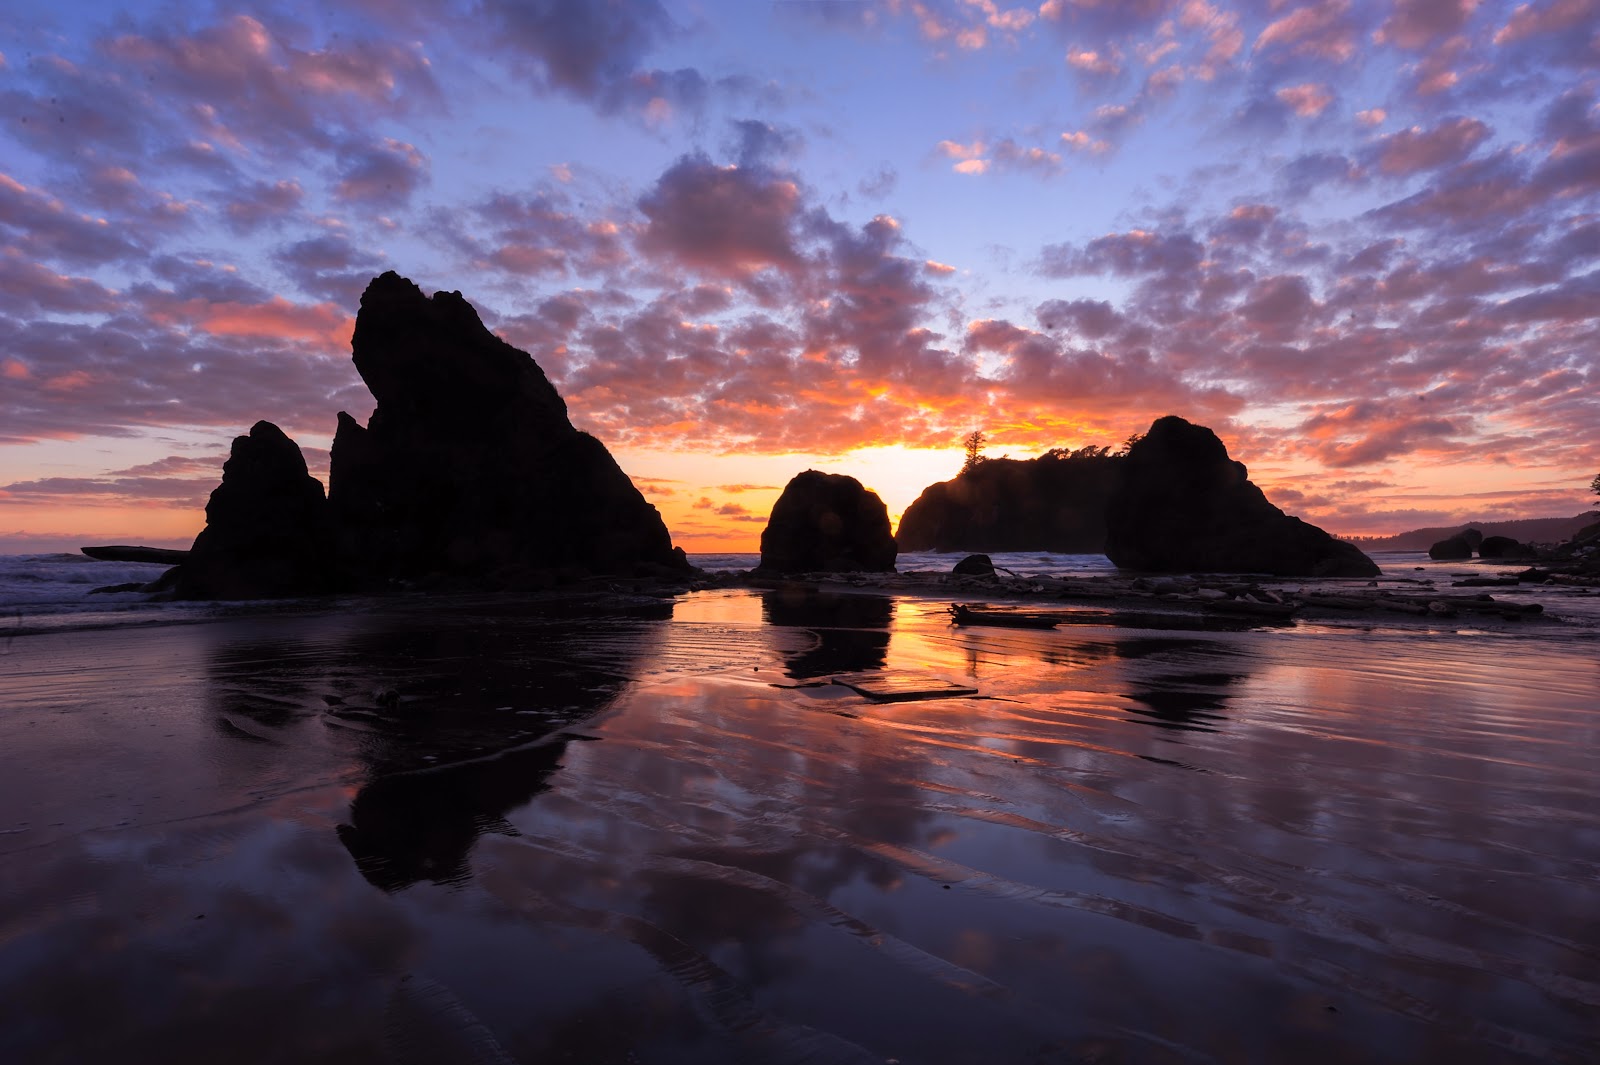 Olympic National Park is a great weekend getaway from Seattle